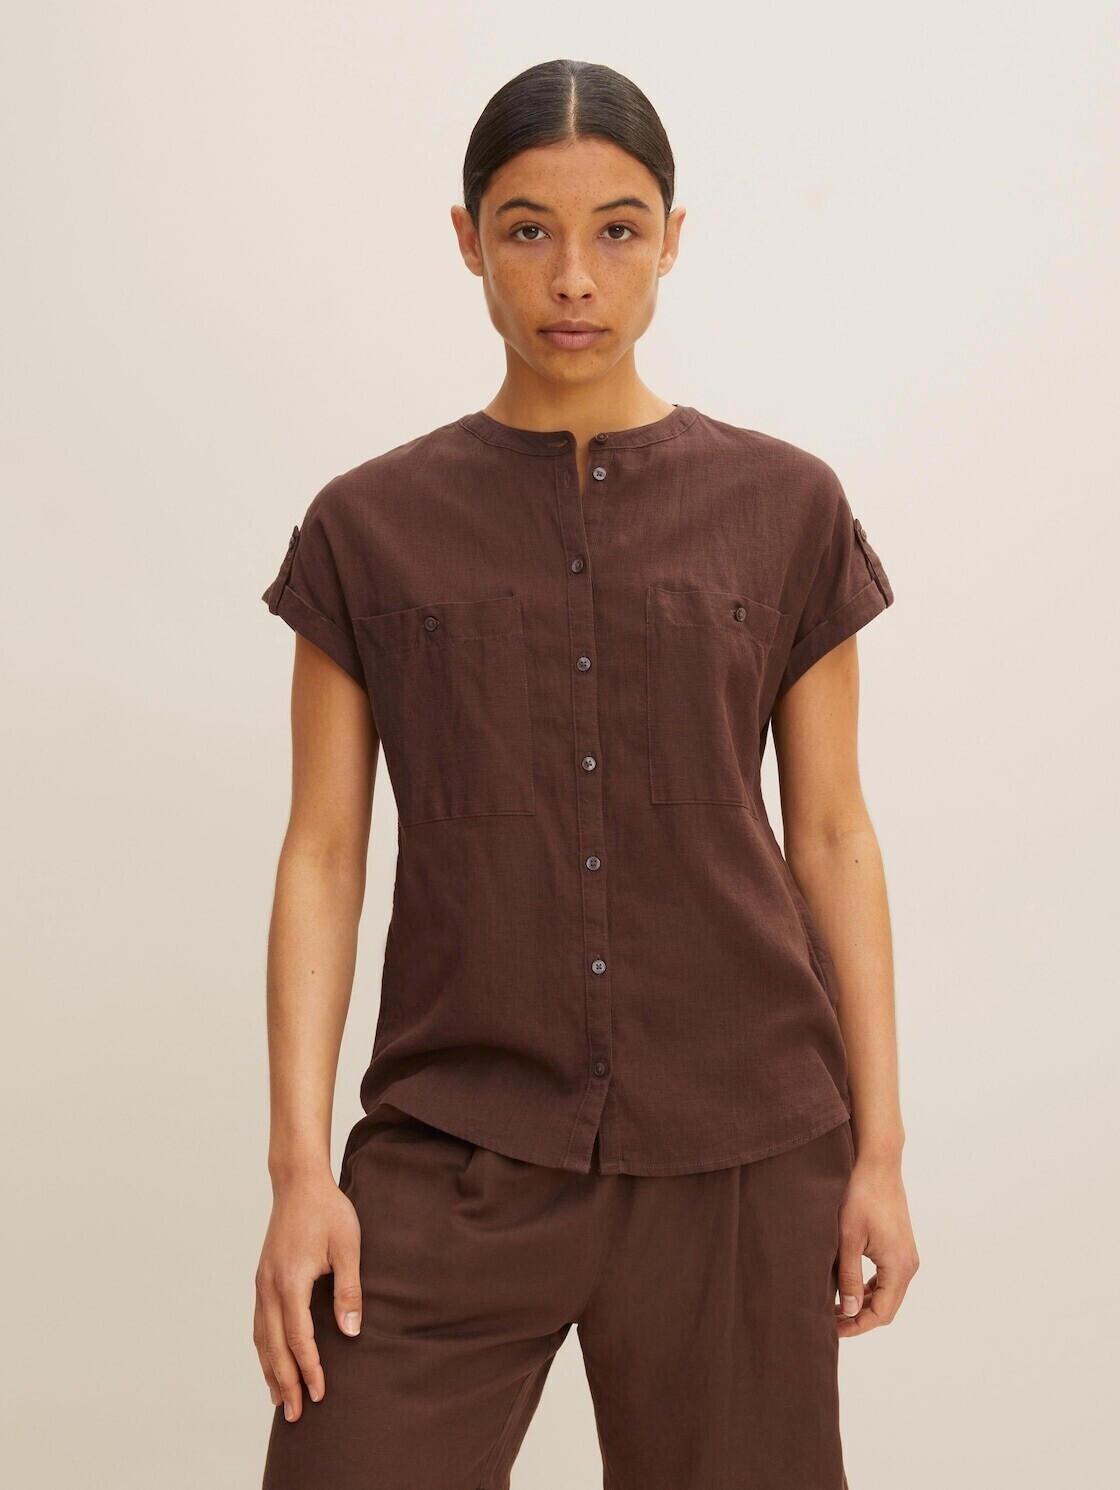 Tom Tailor Blouse (1031264_29521) brown